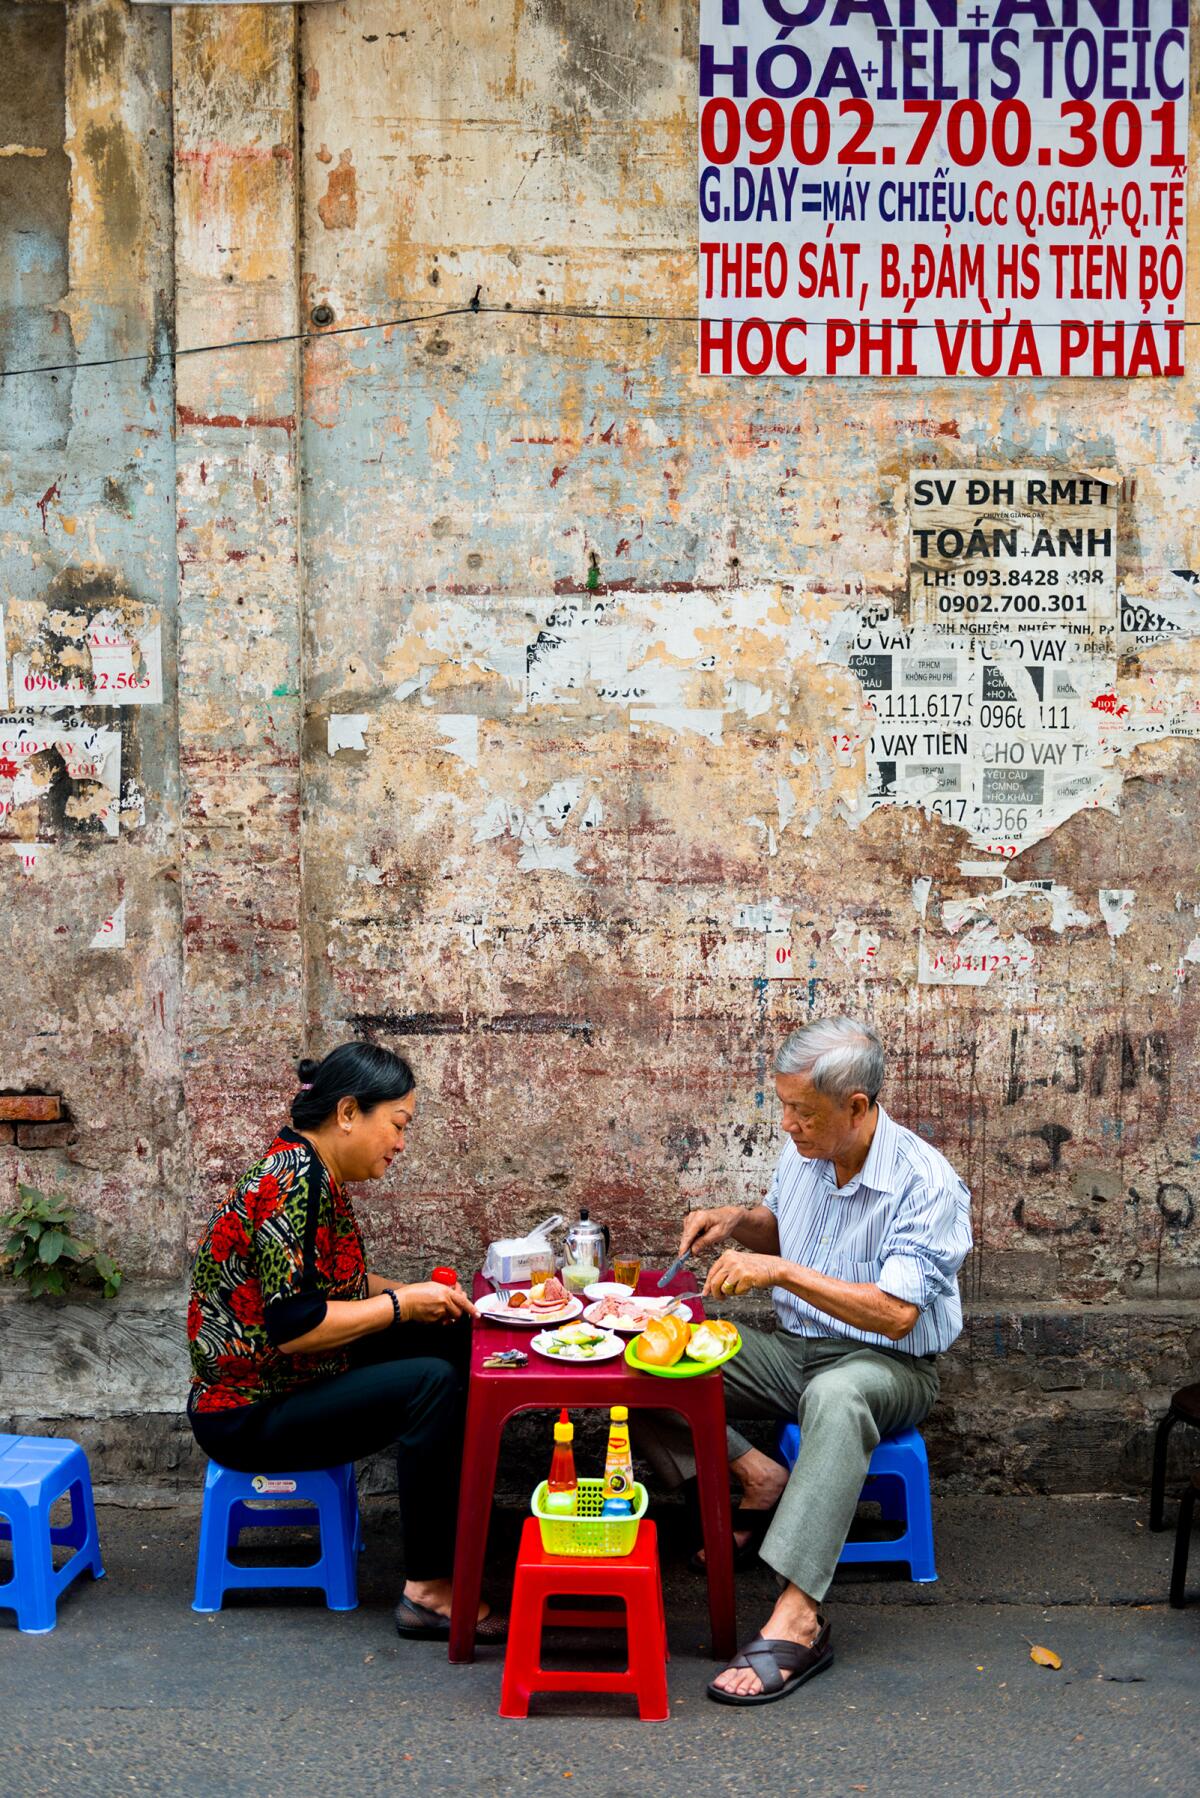 Diners at Banh Mi Moa Ma, one of the oldest restaurants selling banh mi in Ho Chi Minh City.